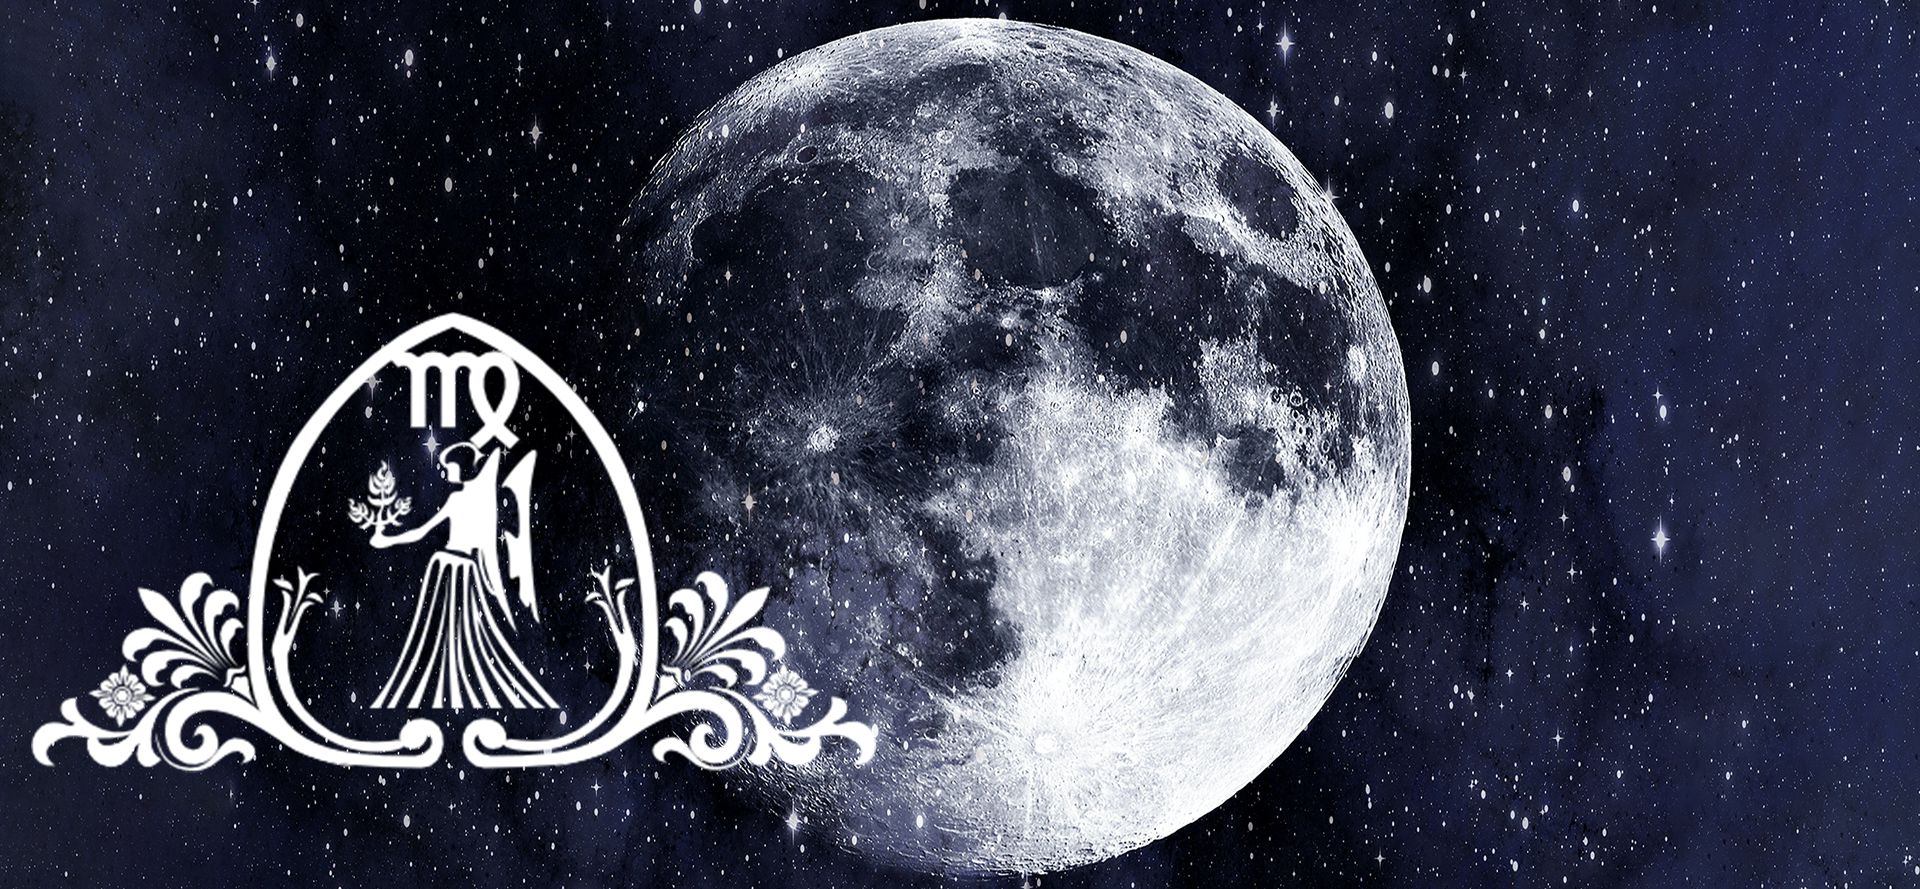 Virgo sign and Moon.